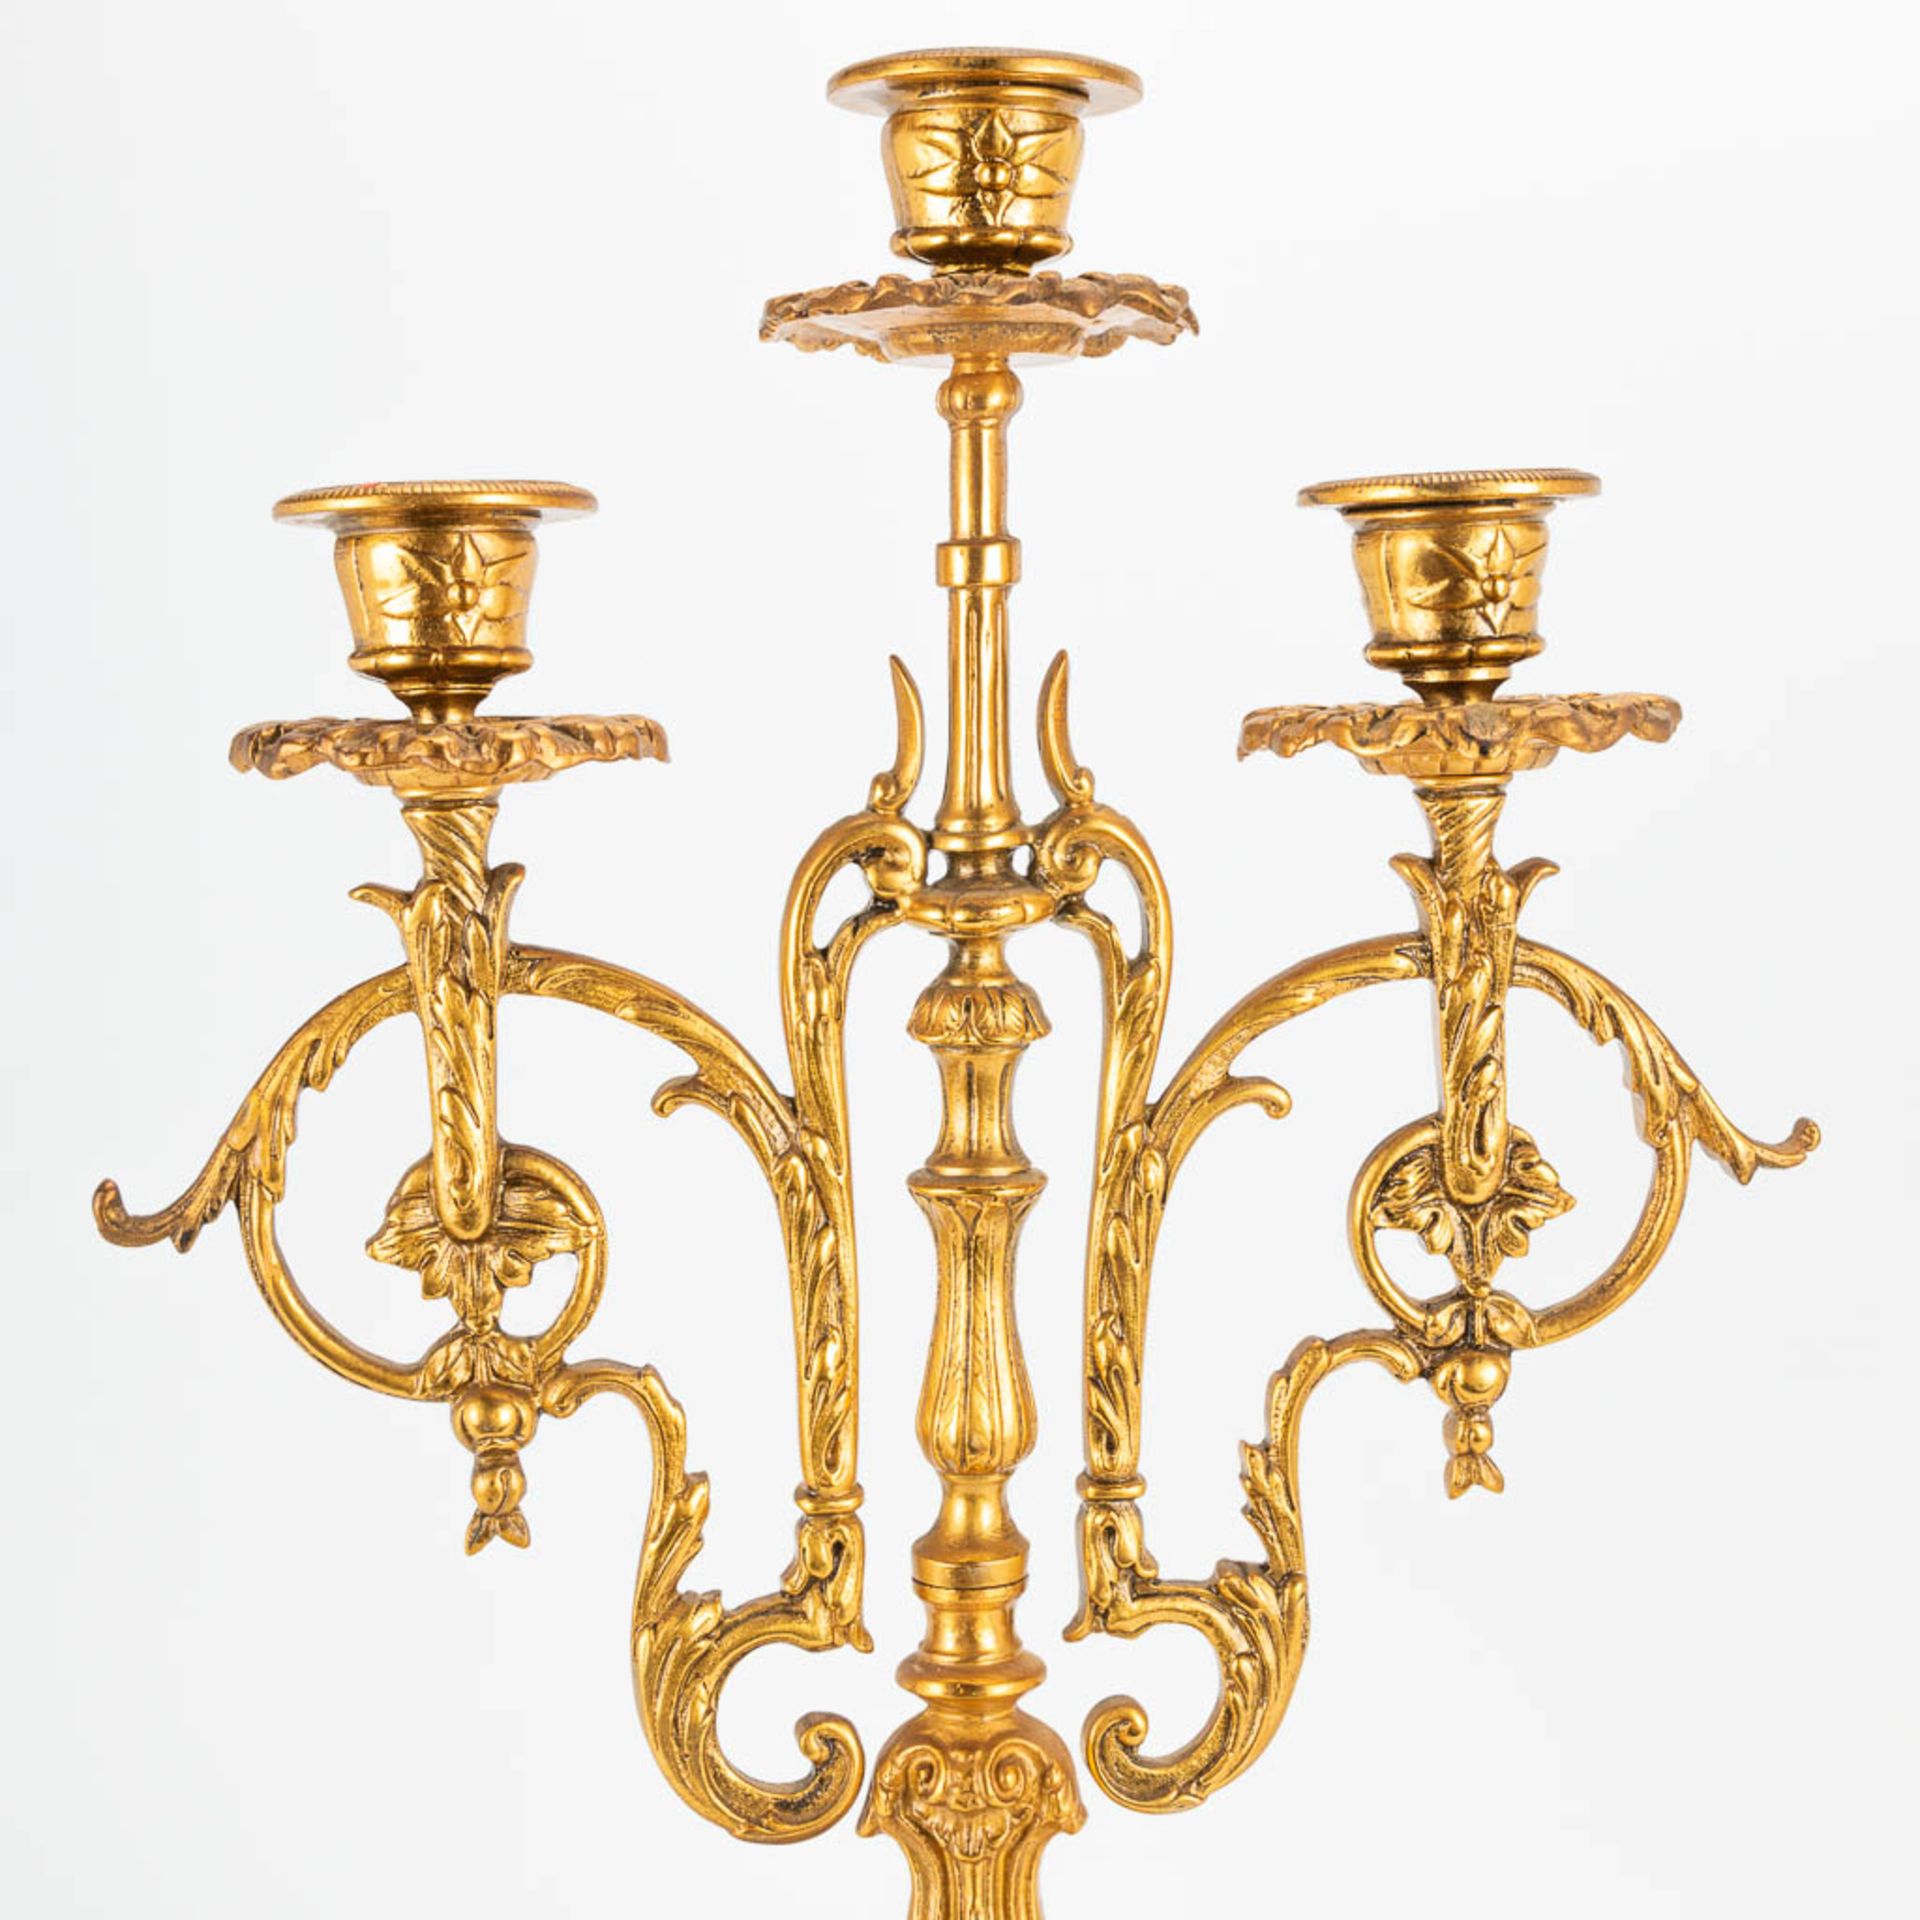 A 3 piece garniture clockset made of bronze, consisting of a clock and 2 candelabra. (9 x 22 x 41 cm - Image 6 of 17